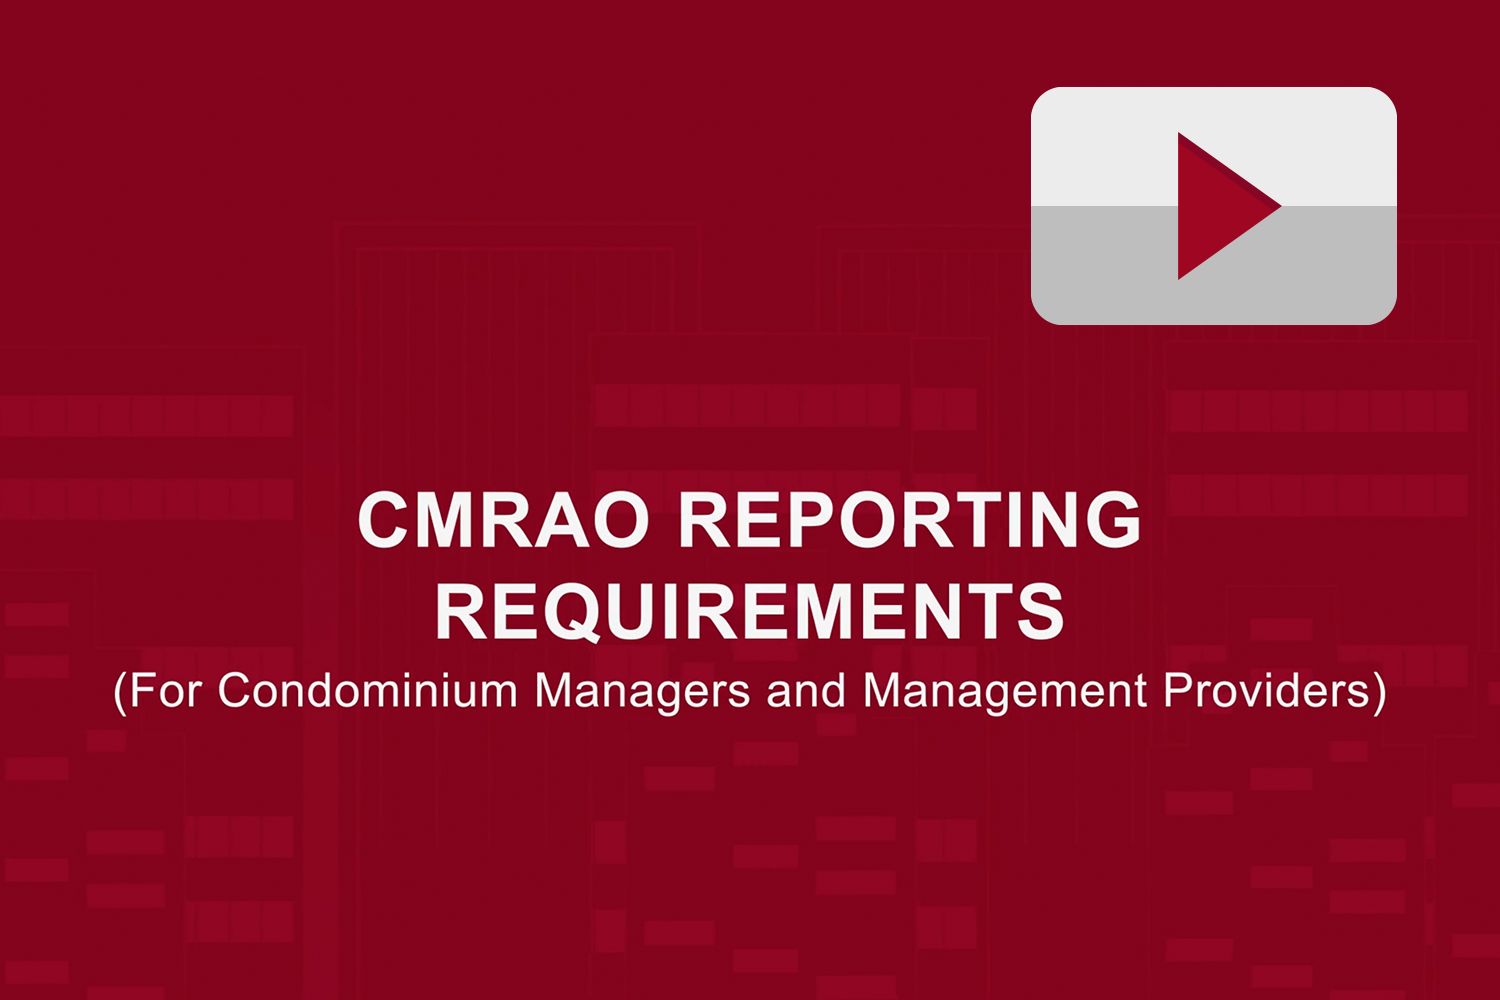 Reporting Requirements (For Condominium Managers and Management Providers)